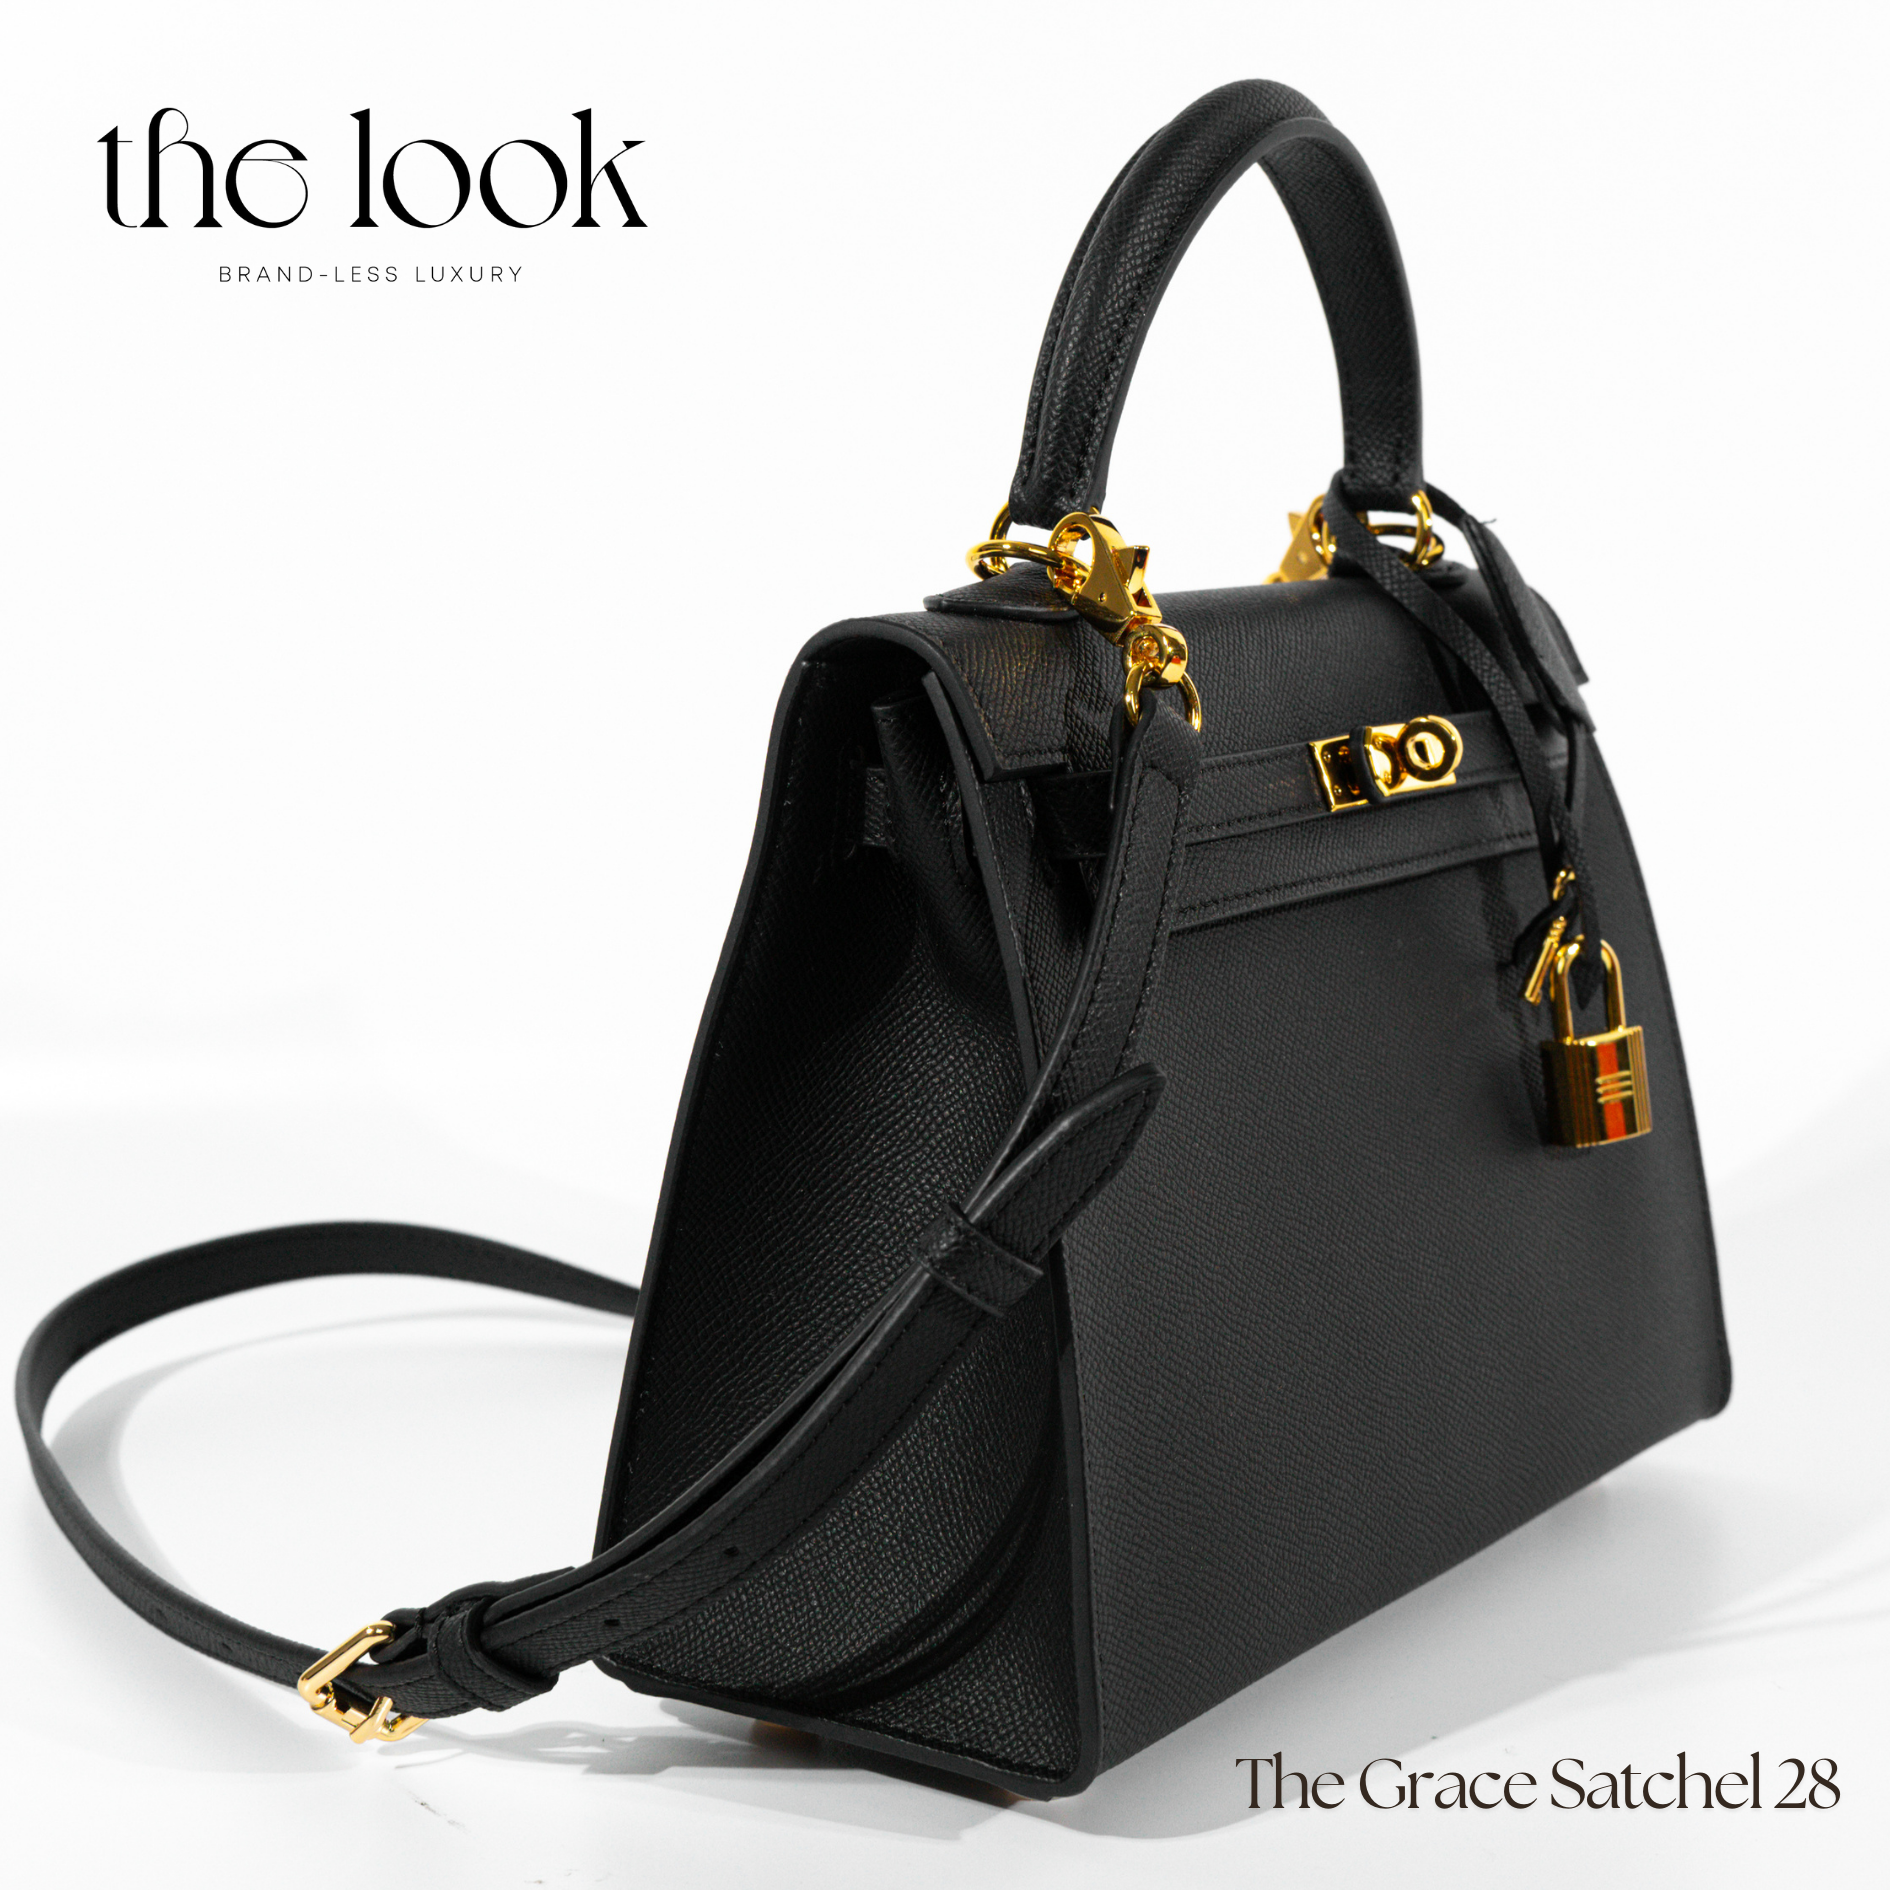 The Grace 28 Satchel Epsom Leather in Noir GHW by The Look